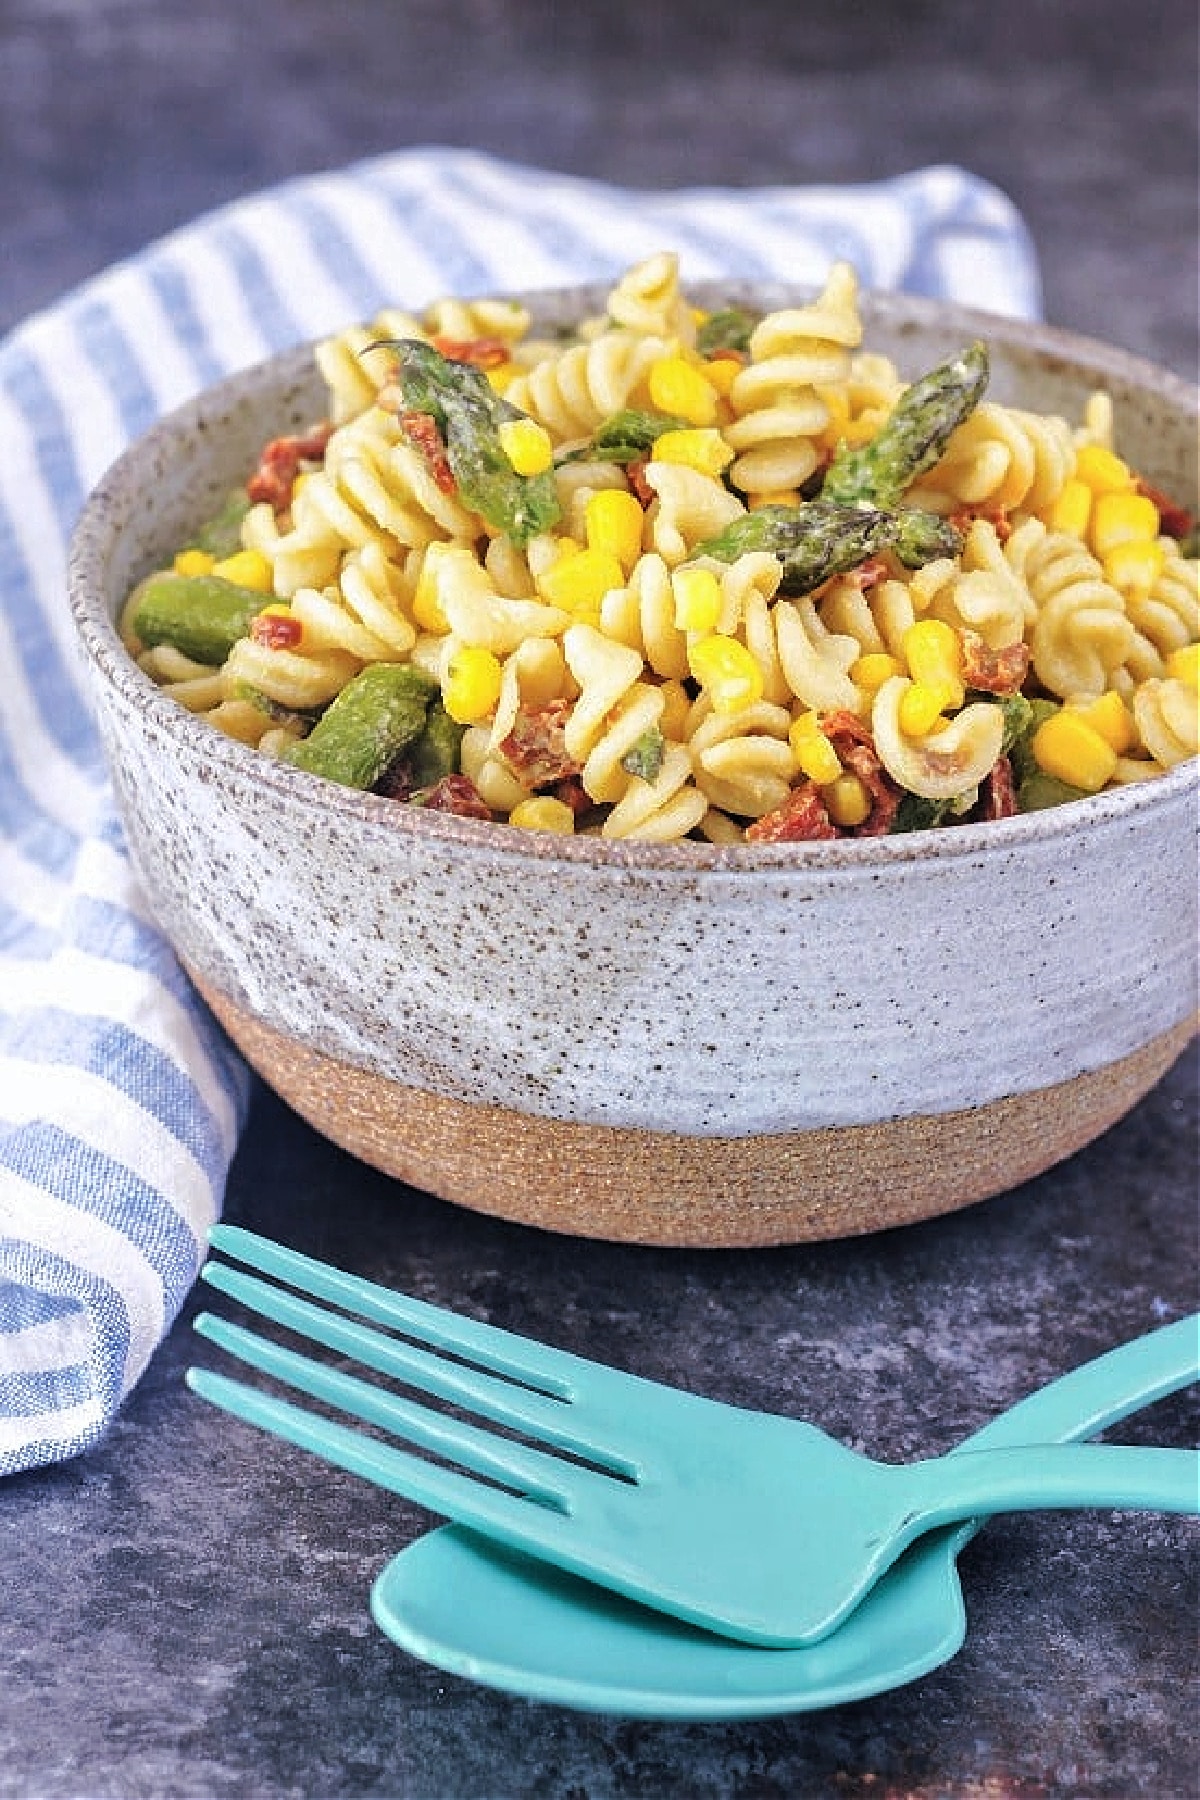 Picnic pasta salad in a large rustic bowl with bright blue serving utensils: curly pasta, asparagus, corn, sundried tomatoes